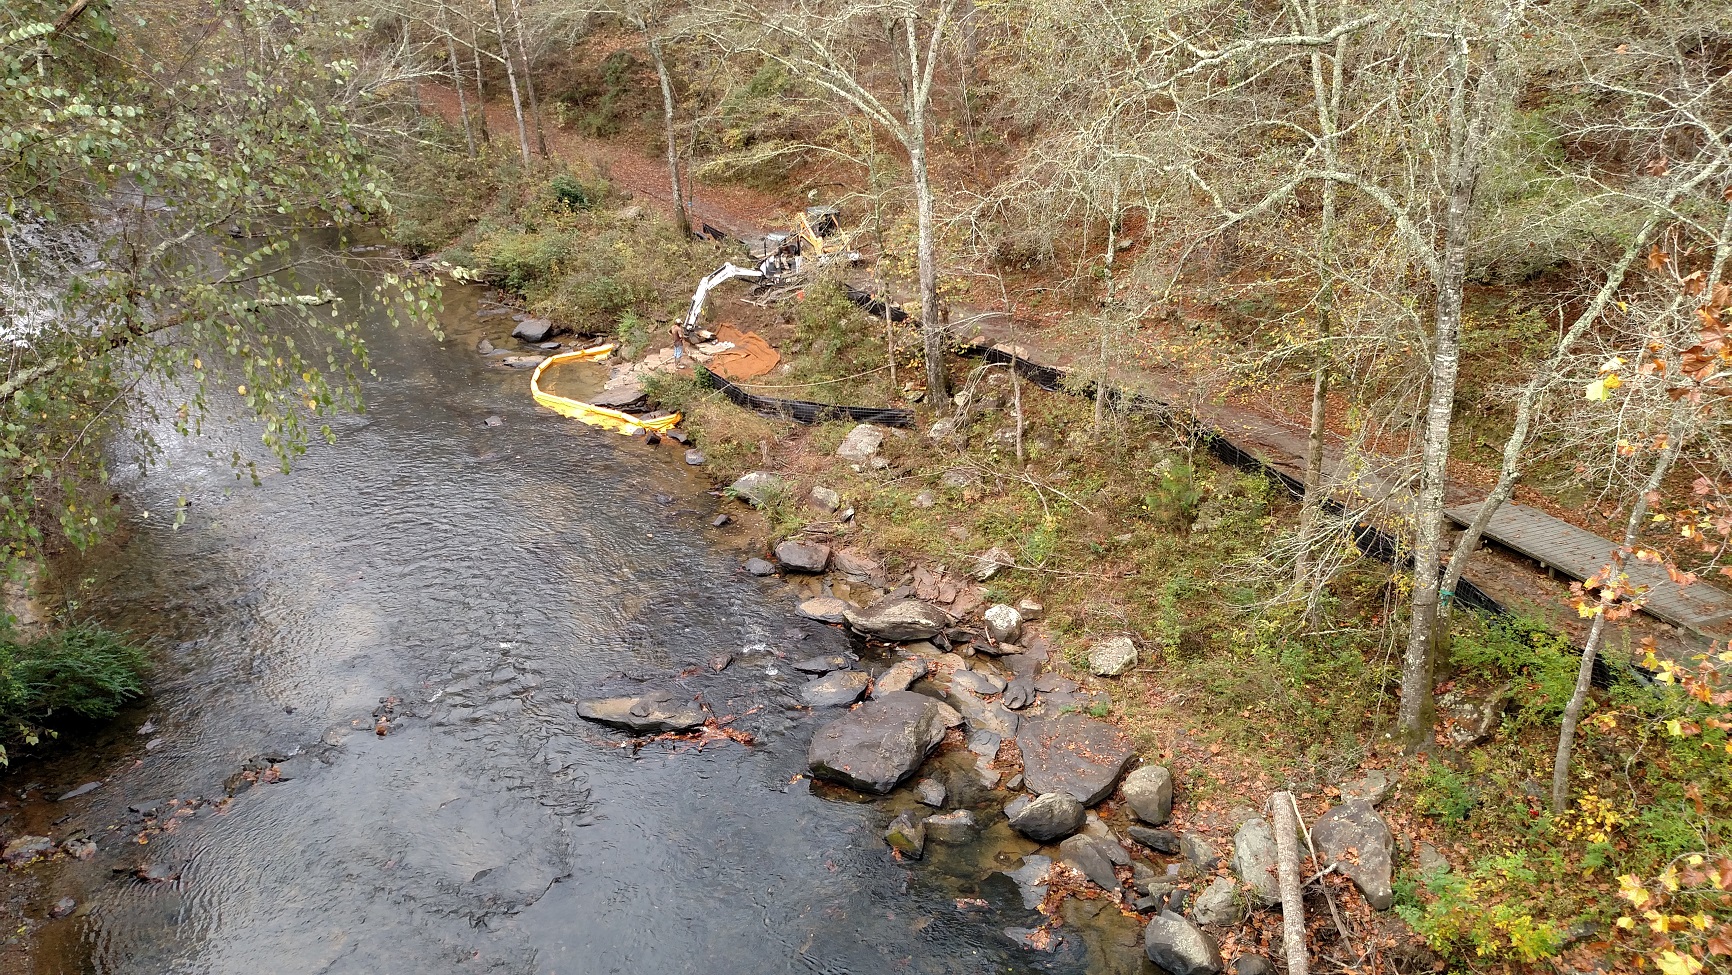 Three rafters found after search of the Cahaba River